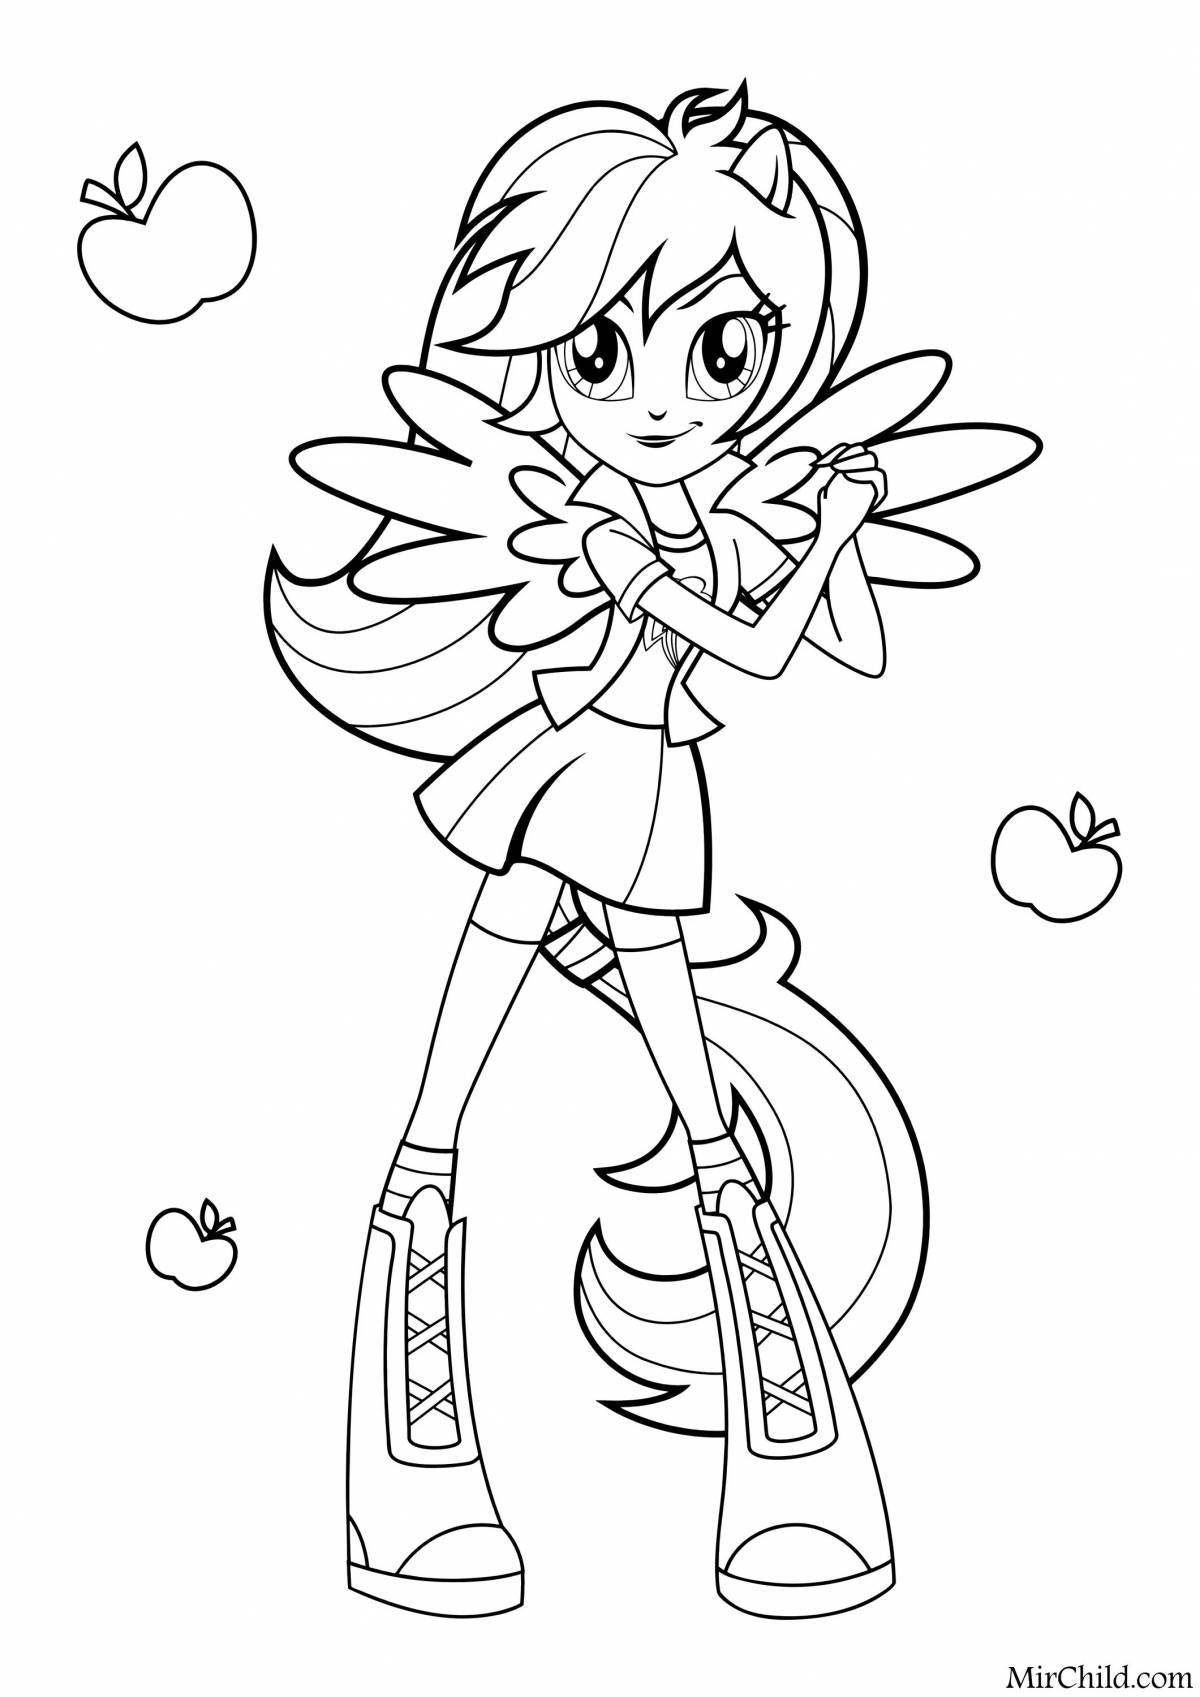 Coloring pages joyful little pony girls